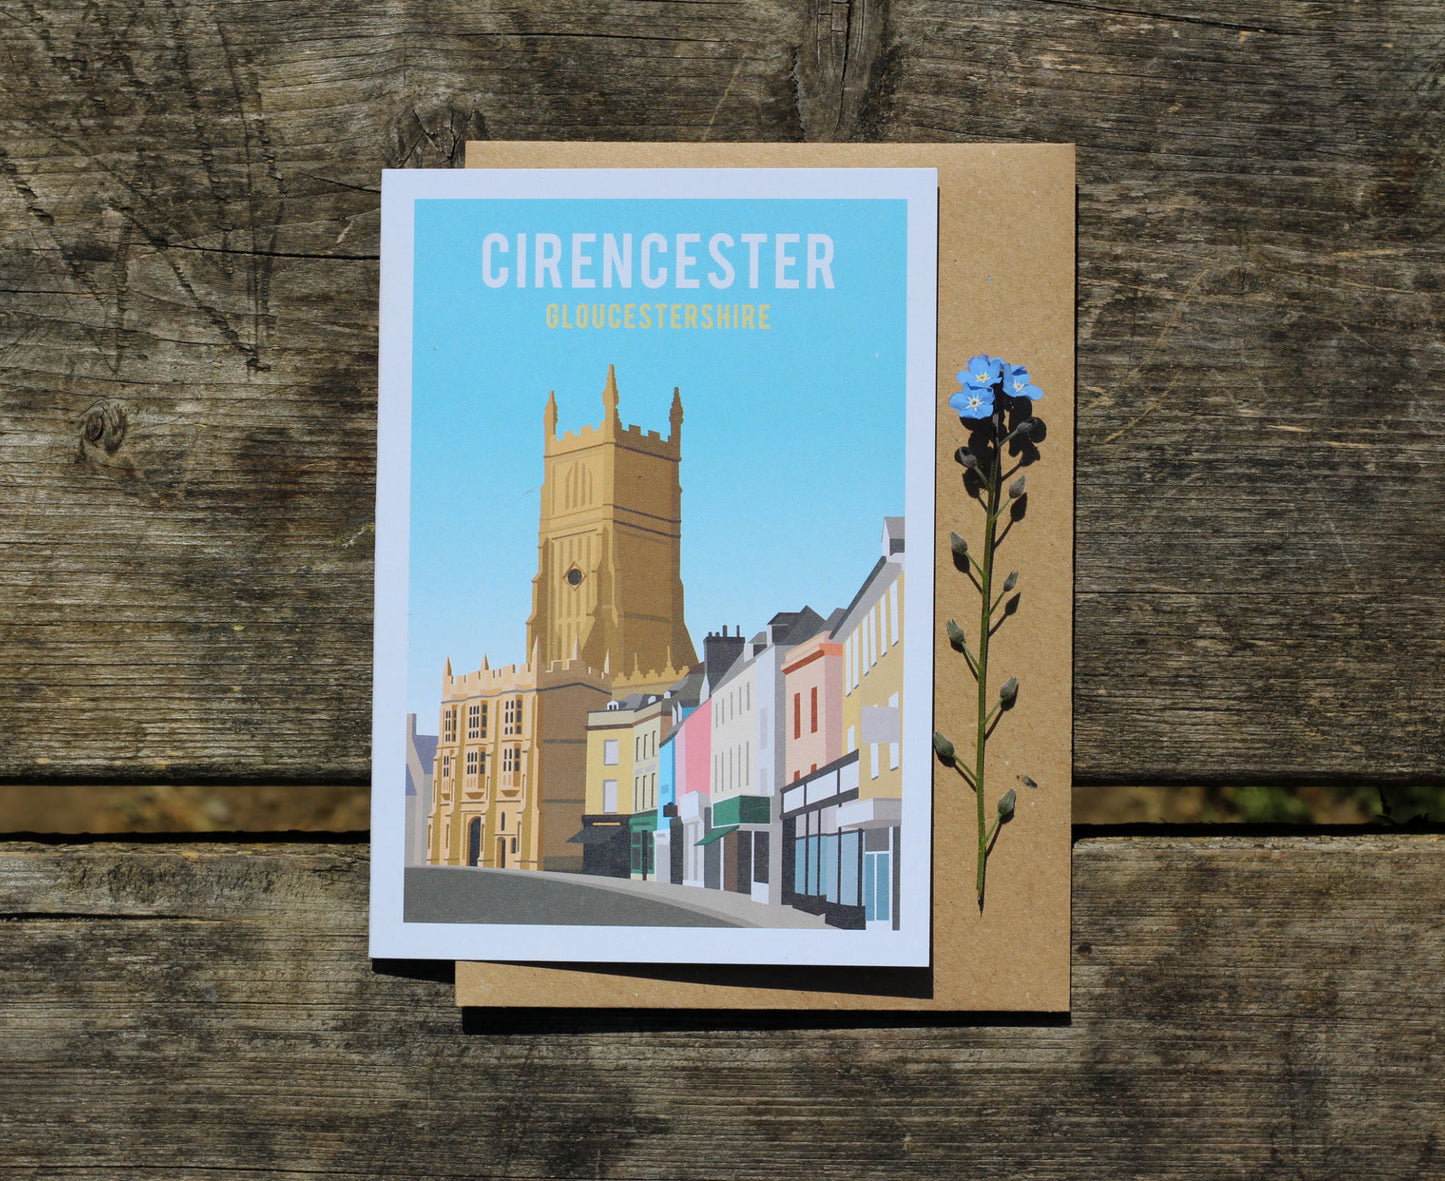 Cirencester Church Greeting Card on table